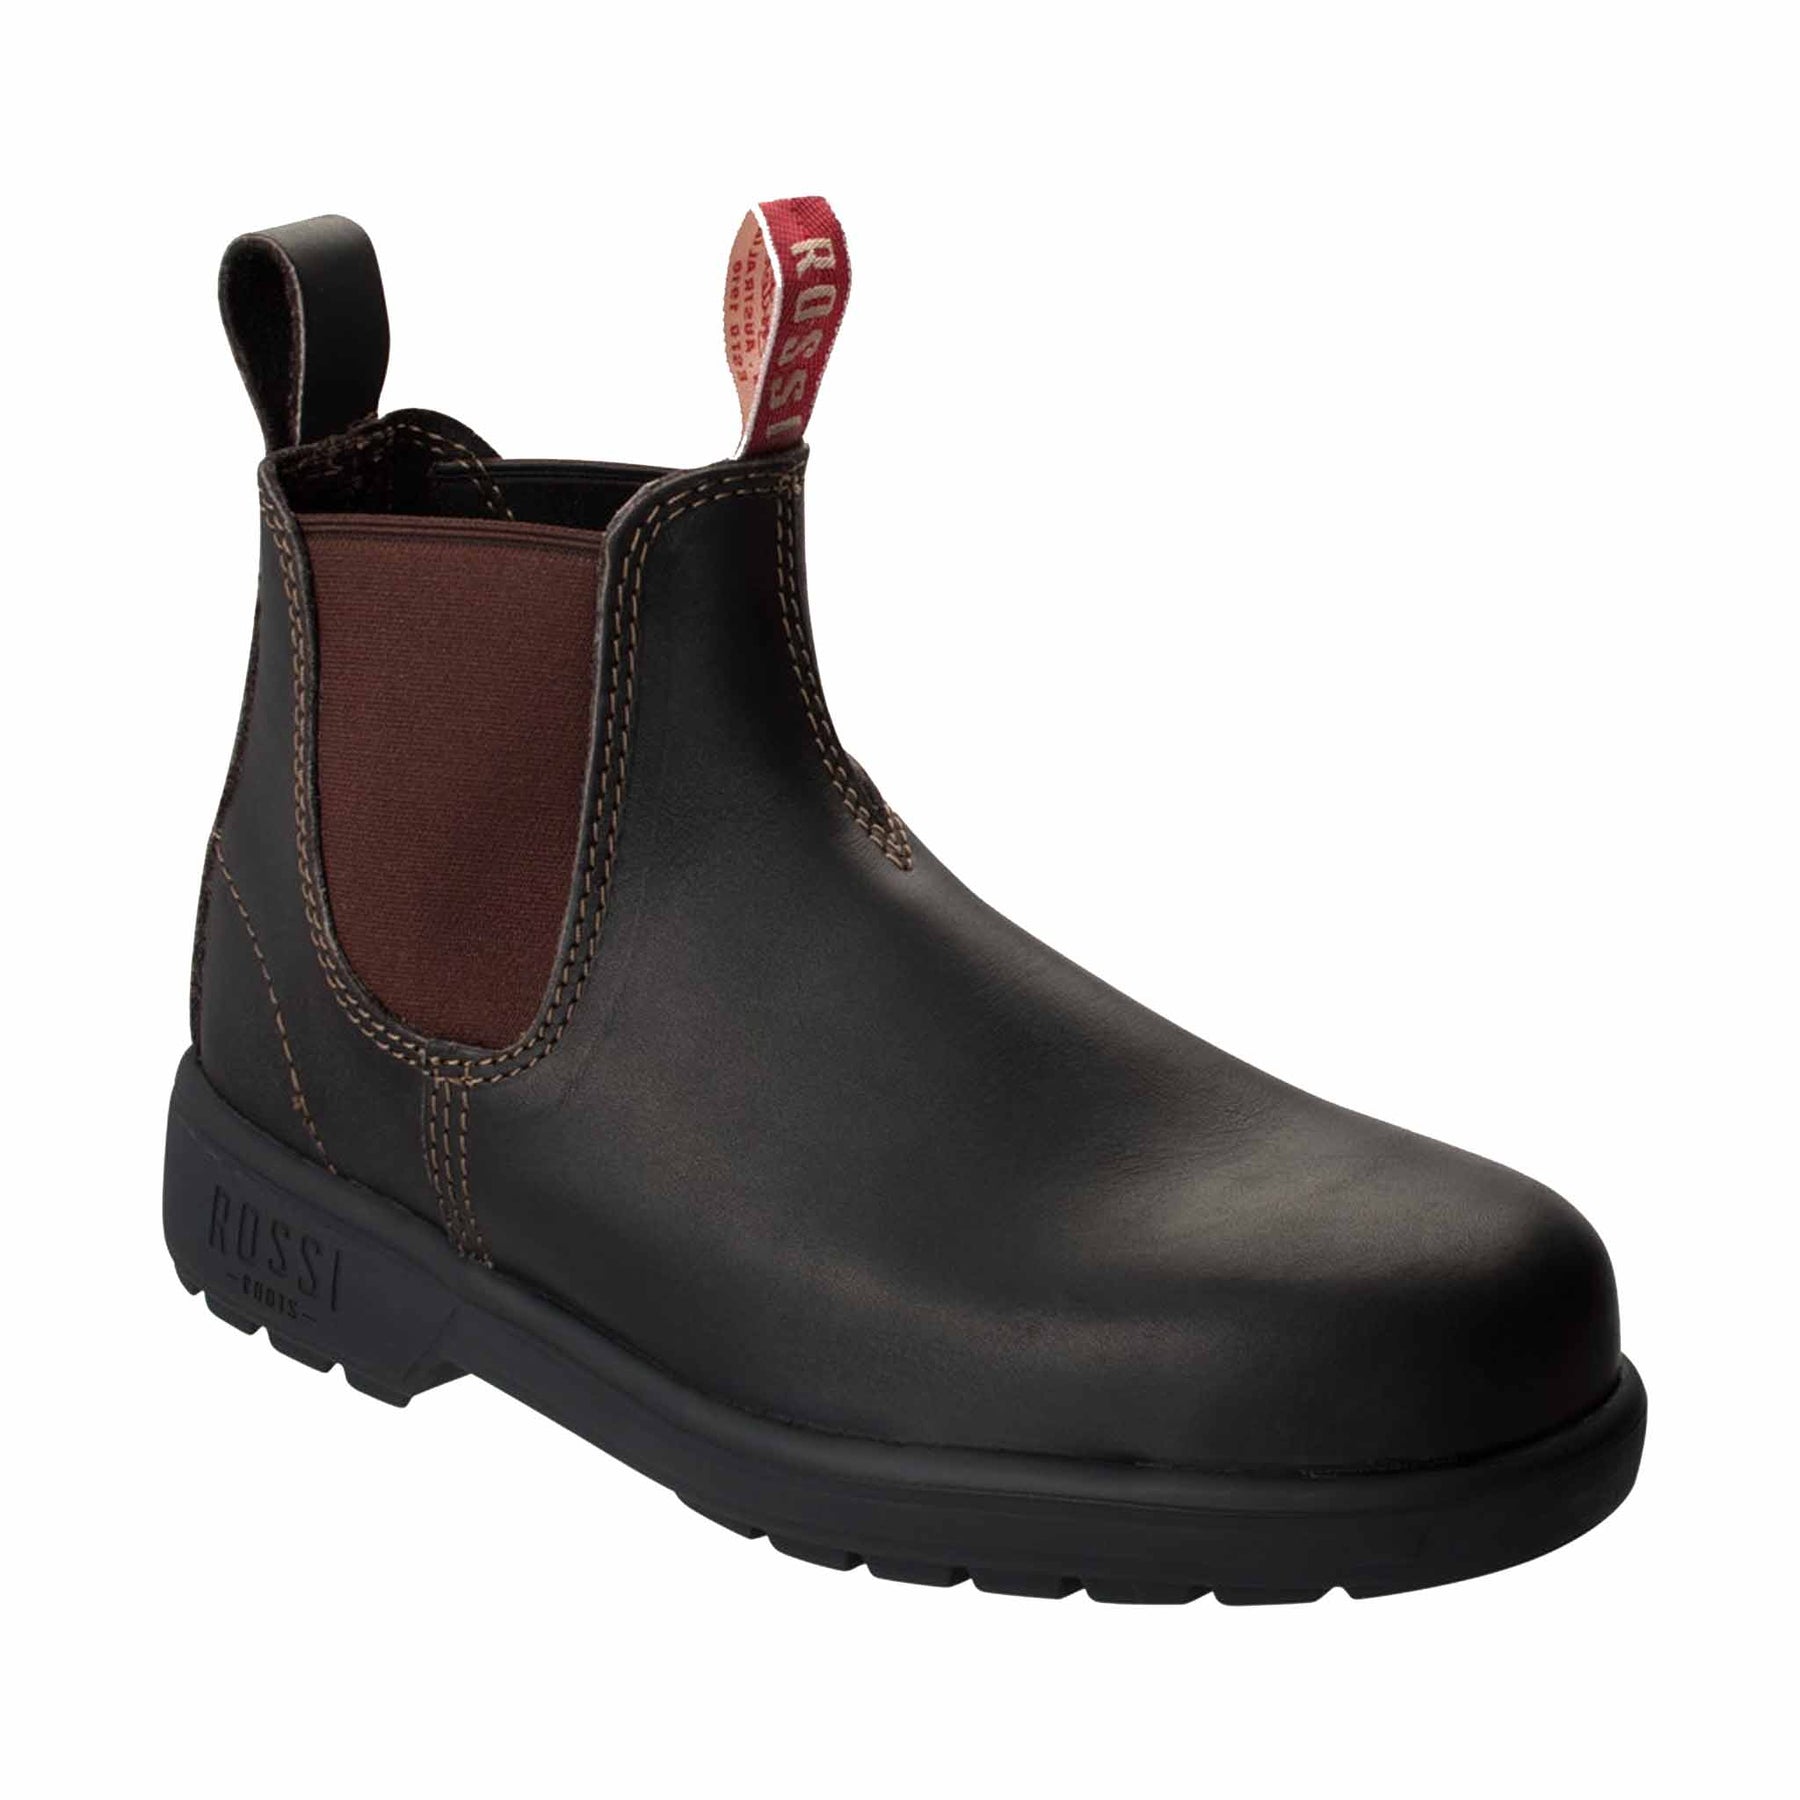 trojan safety pull on boot in brown